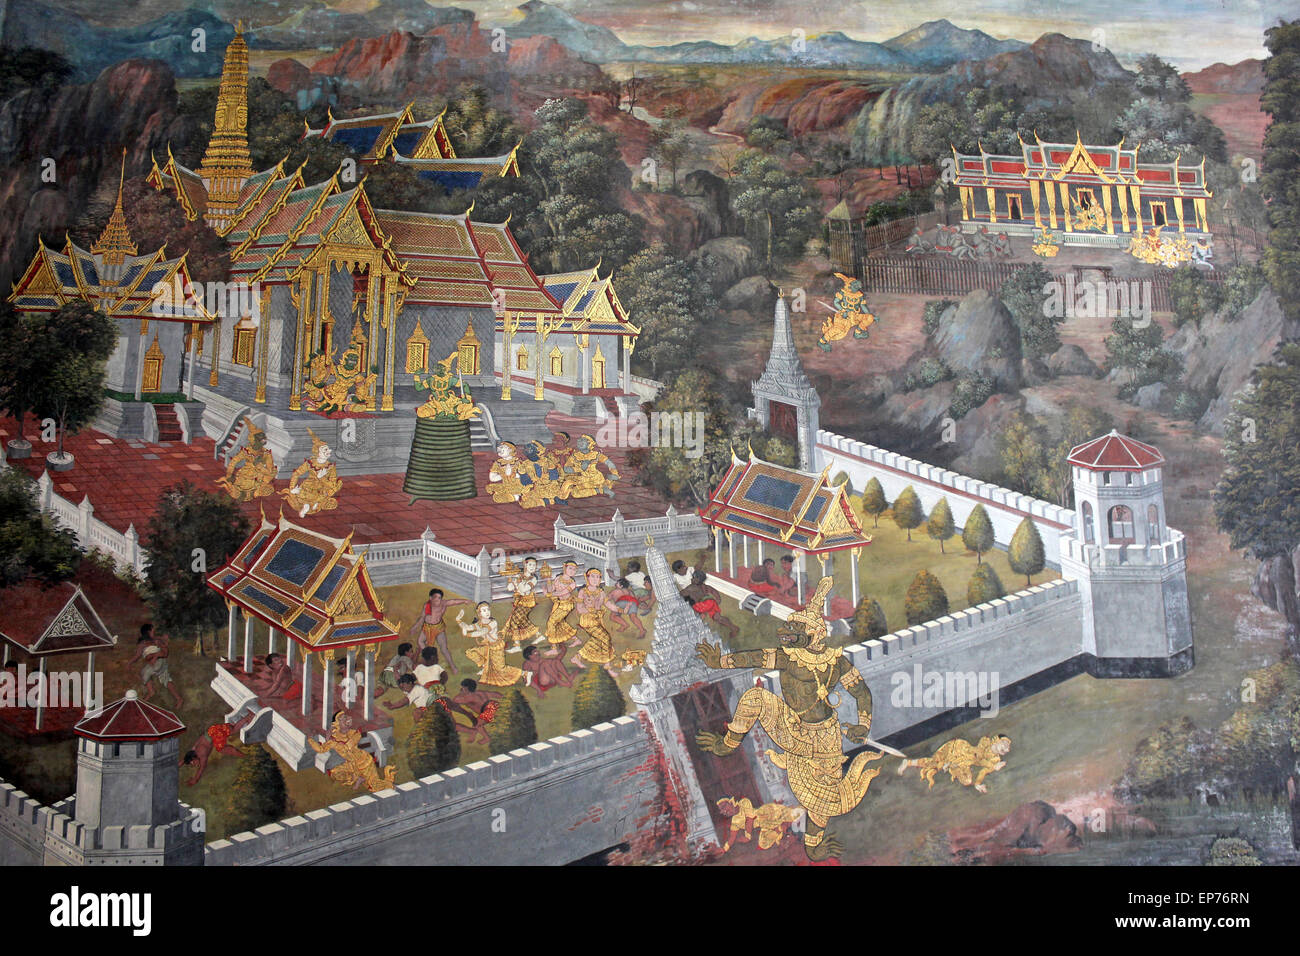 Thai Mural Painting In The Phra Rabiang (The Gallery) in Wat Phra Kaew (Temple of Emerald Buddha), Bangkok Stock Photo